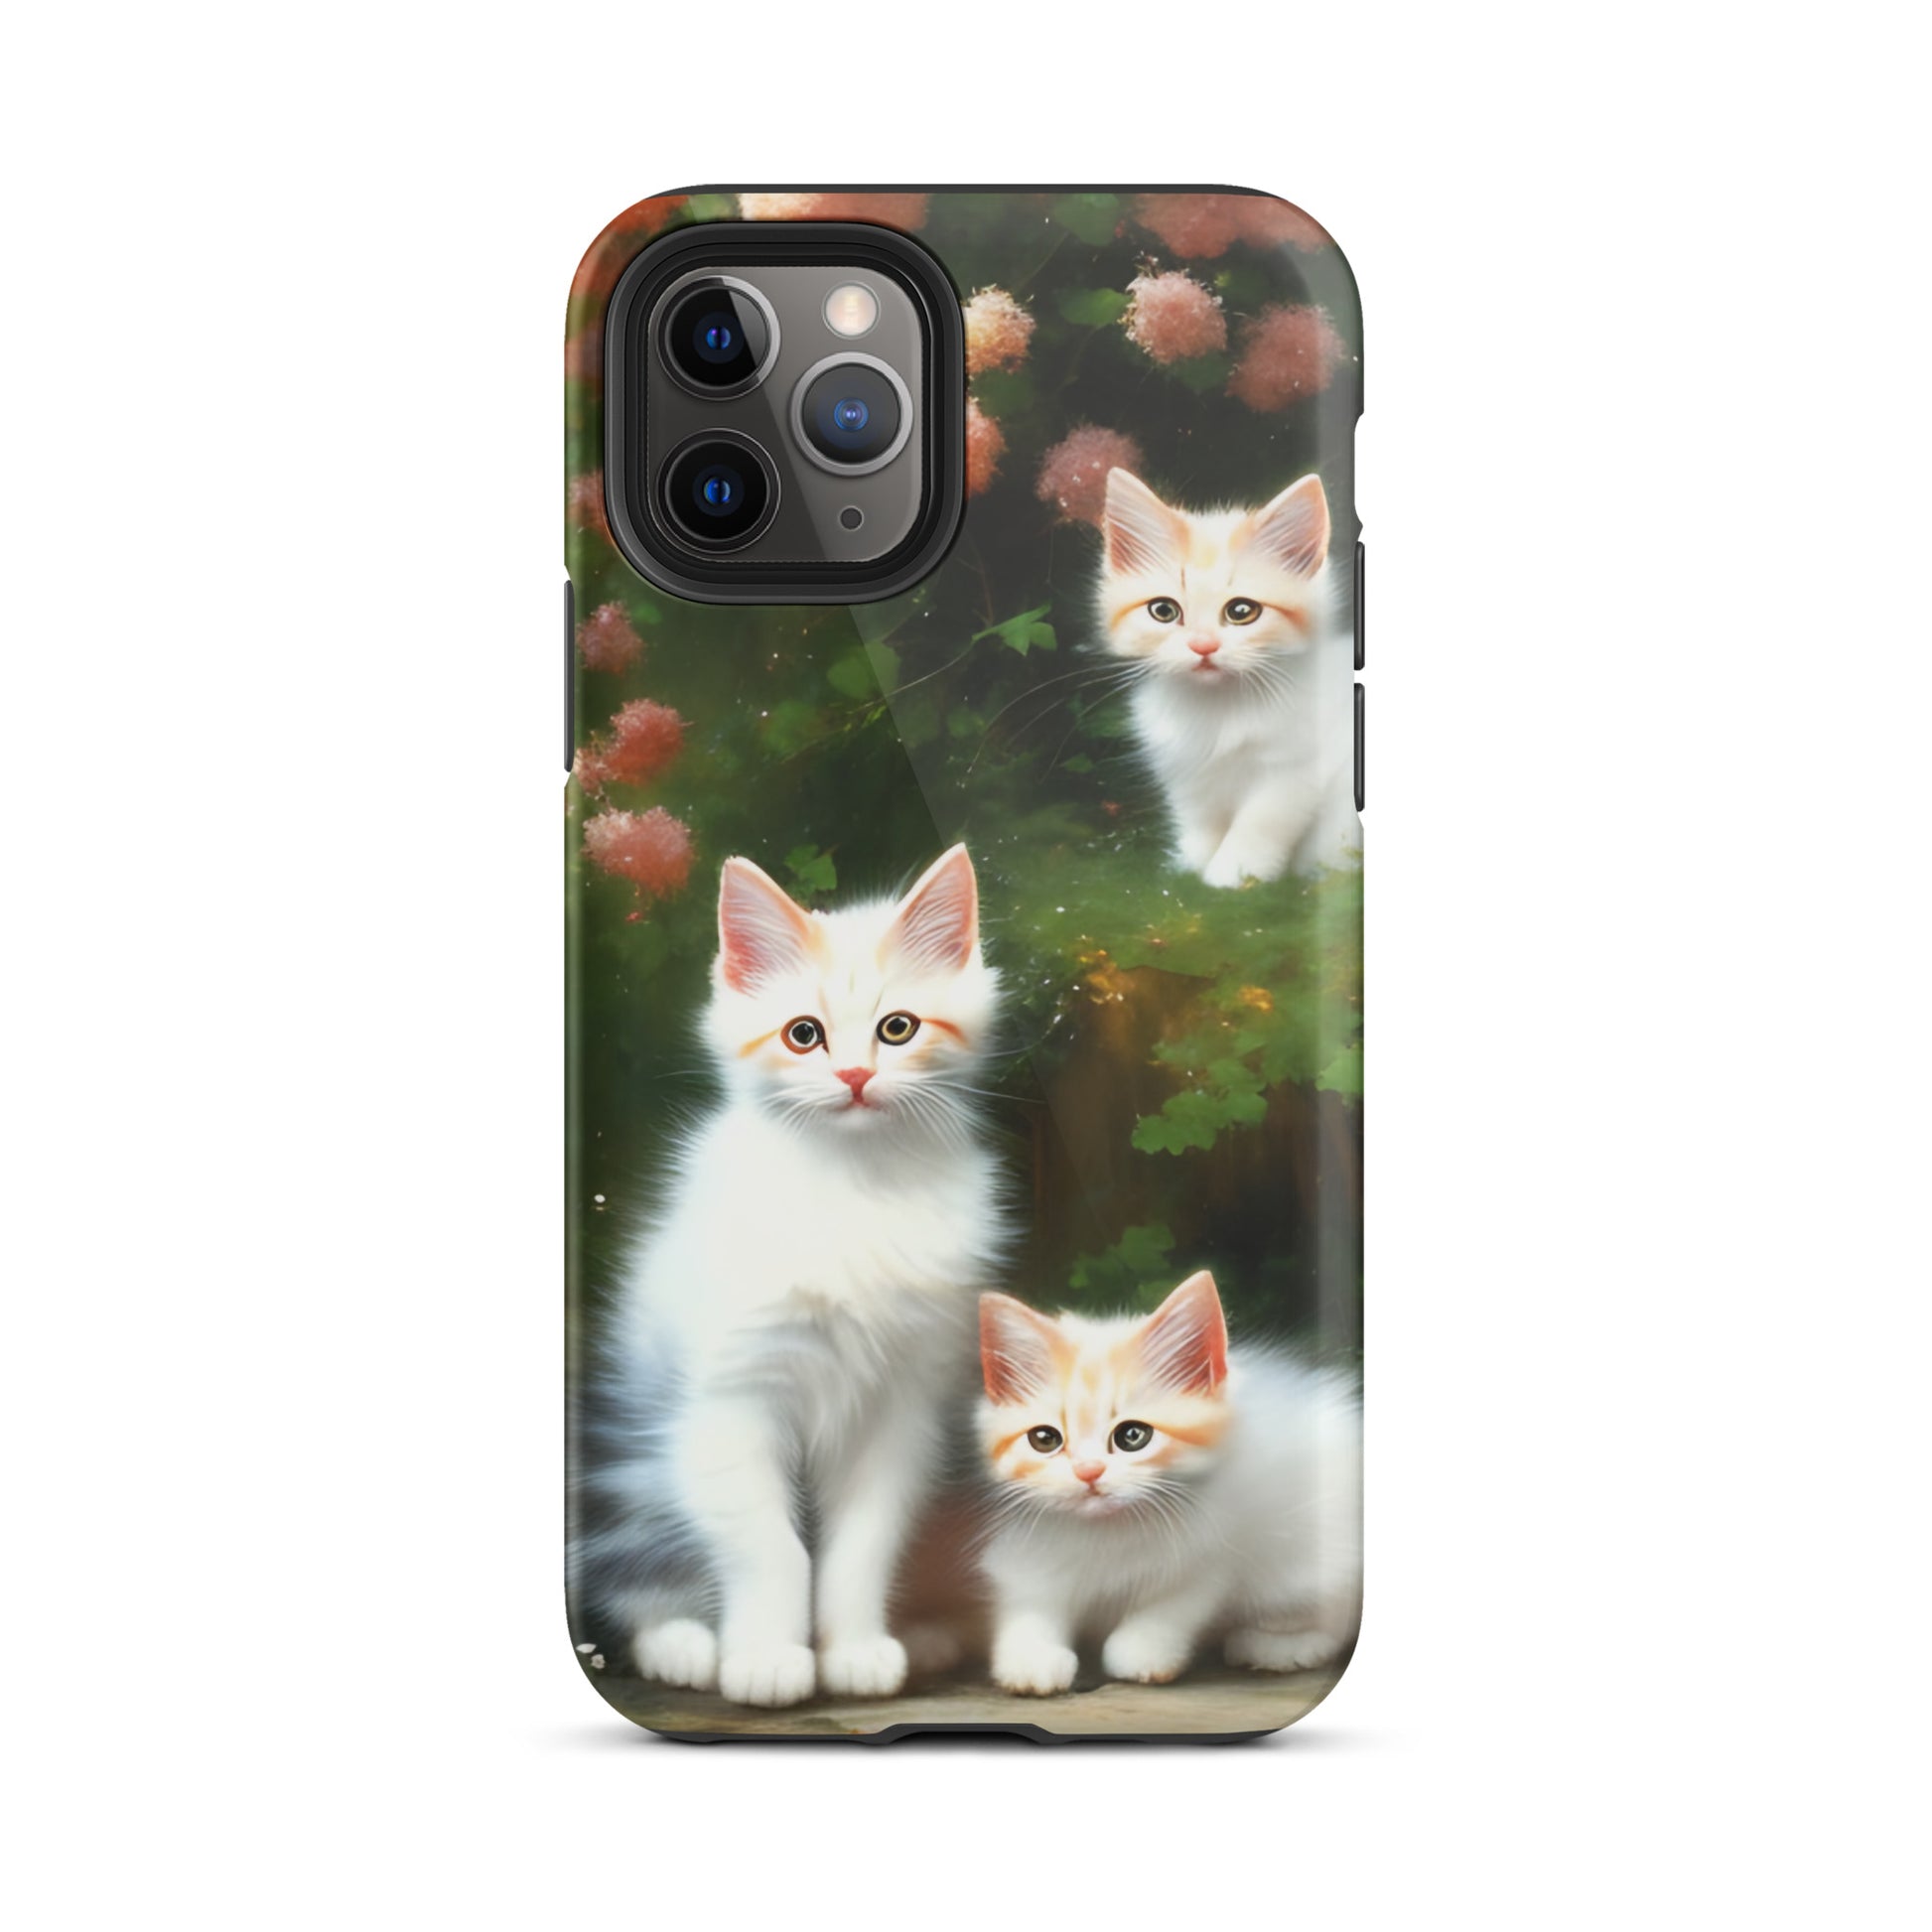 A picture of a iphone tough case with 3 fluffy white and orange kittens and peach colored flowers in the background - glossy-iphone-11-pro-front